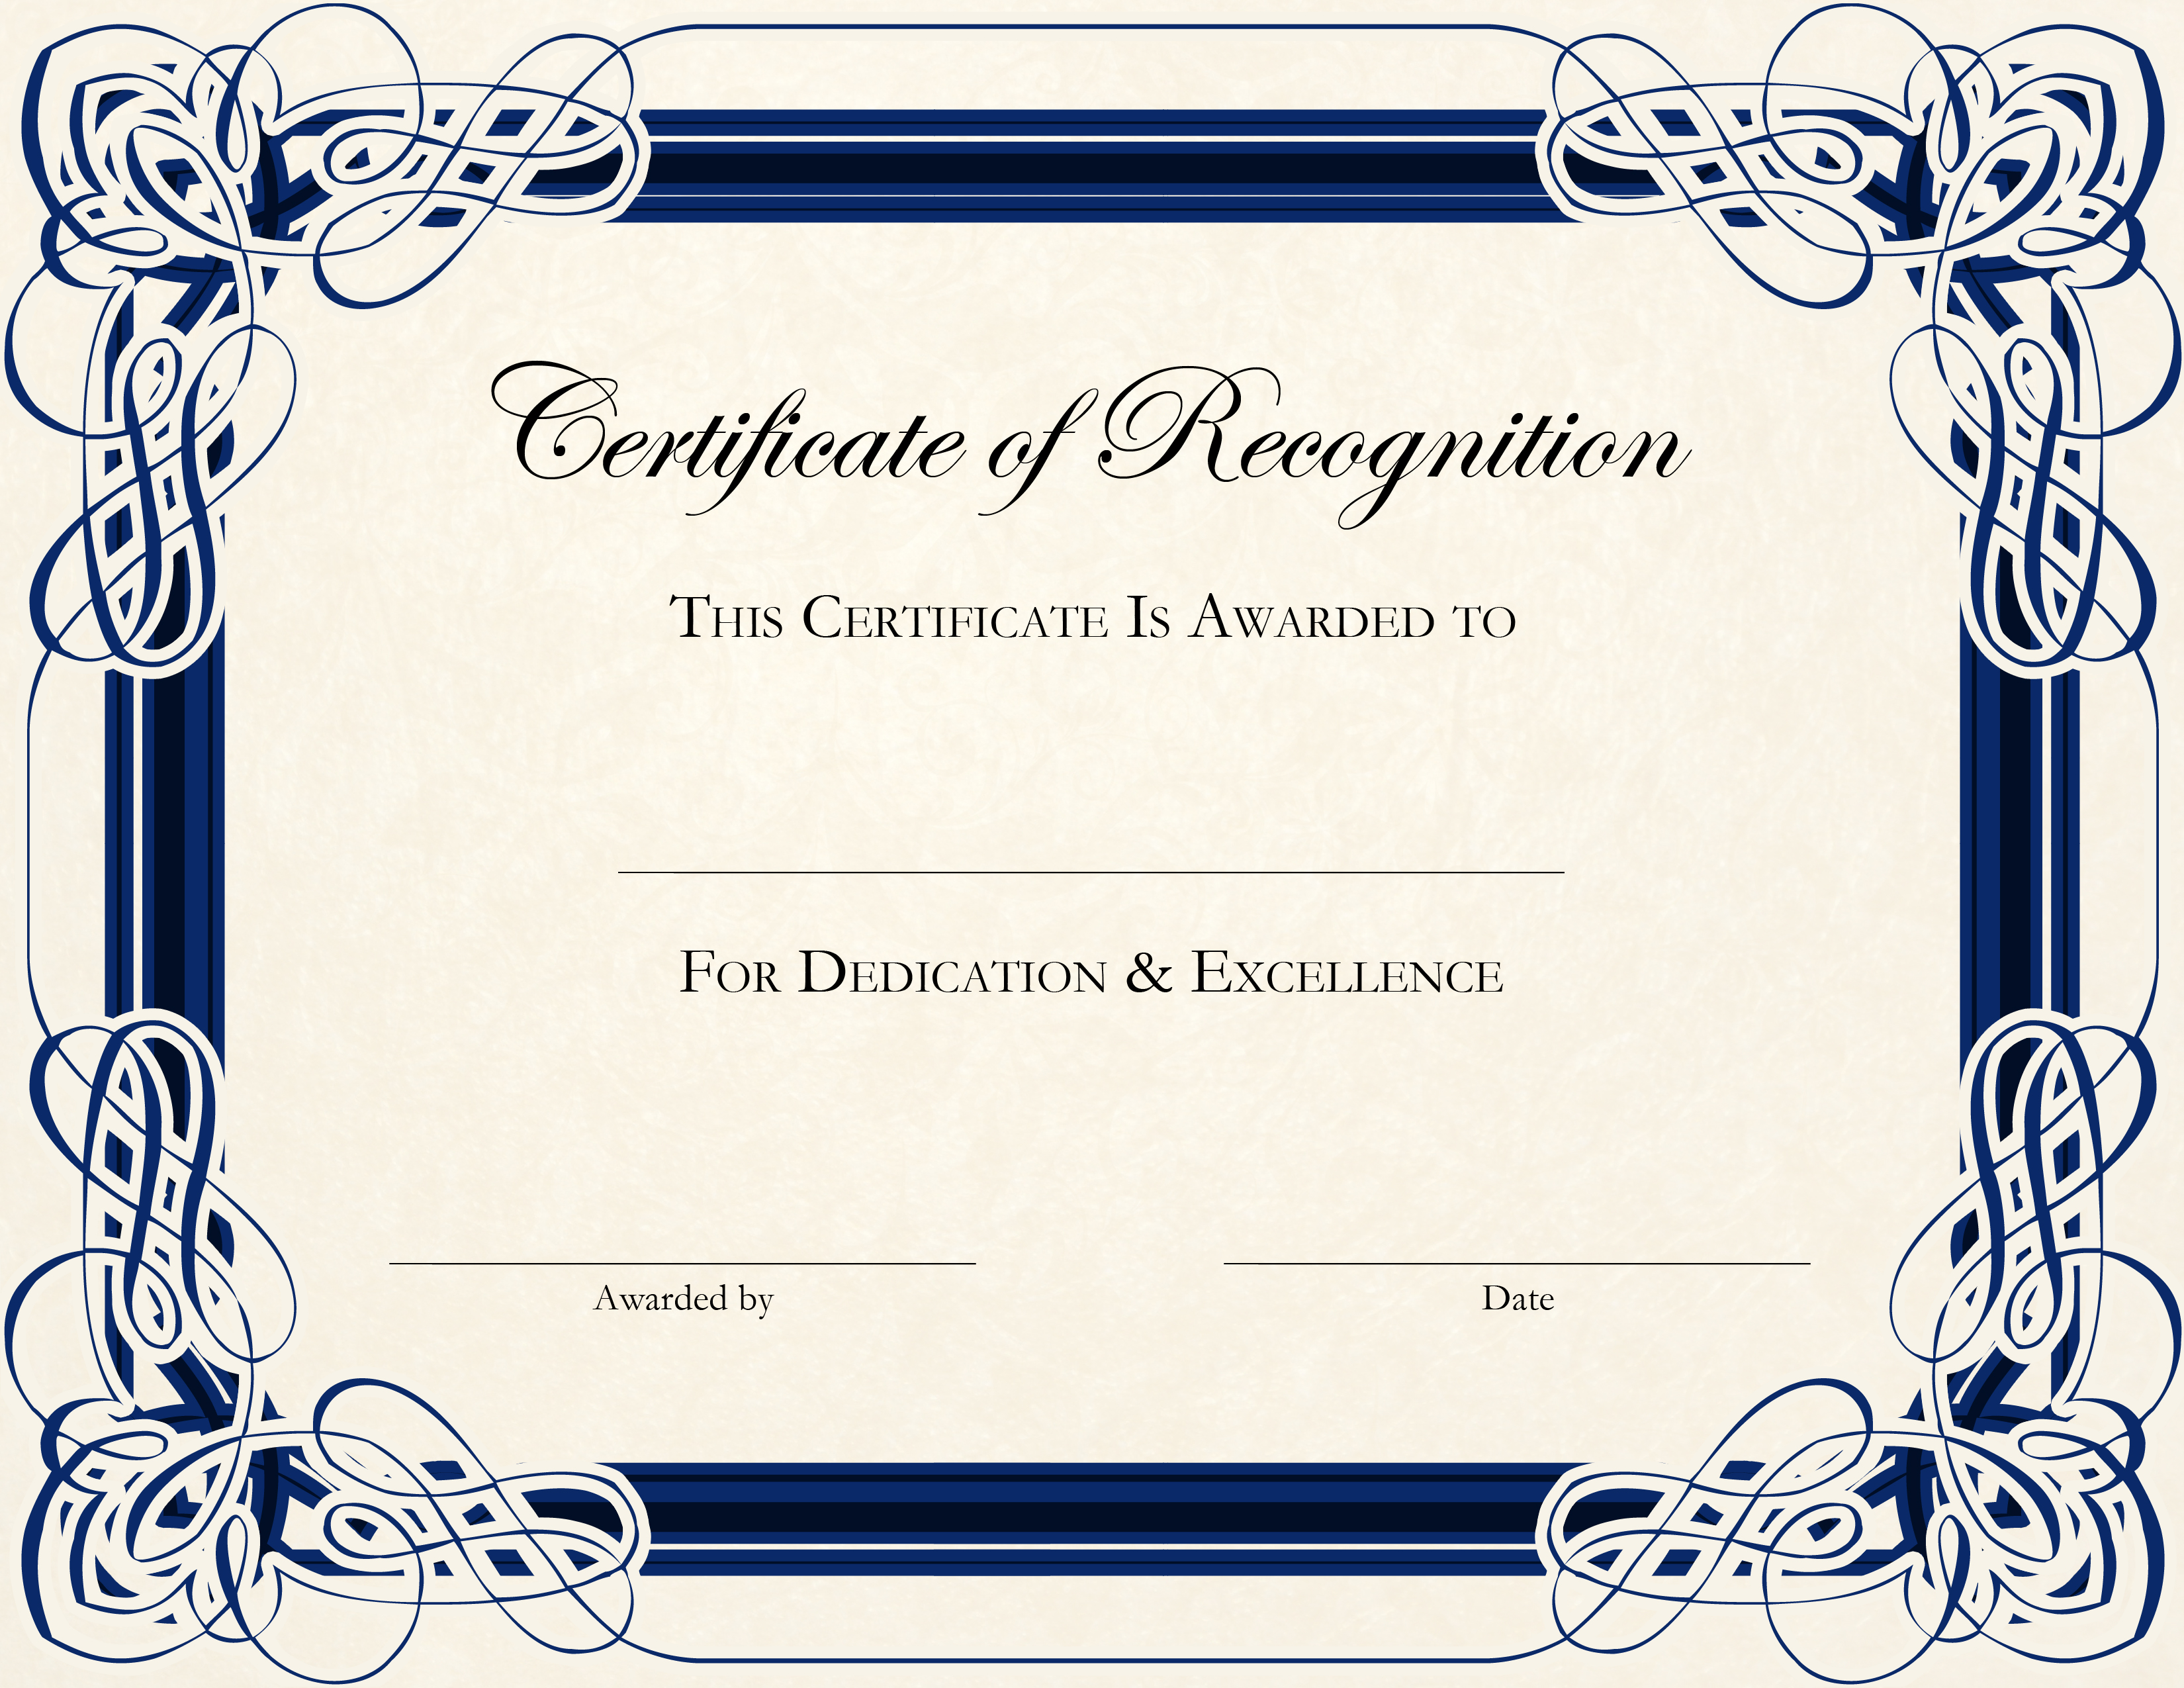 Certificate Of E Template Free Printable